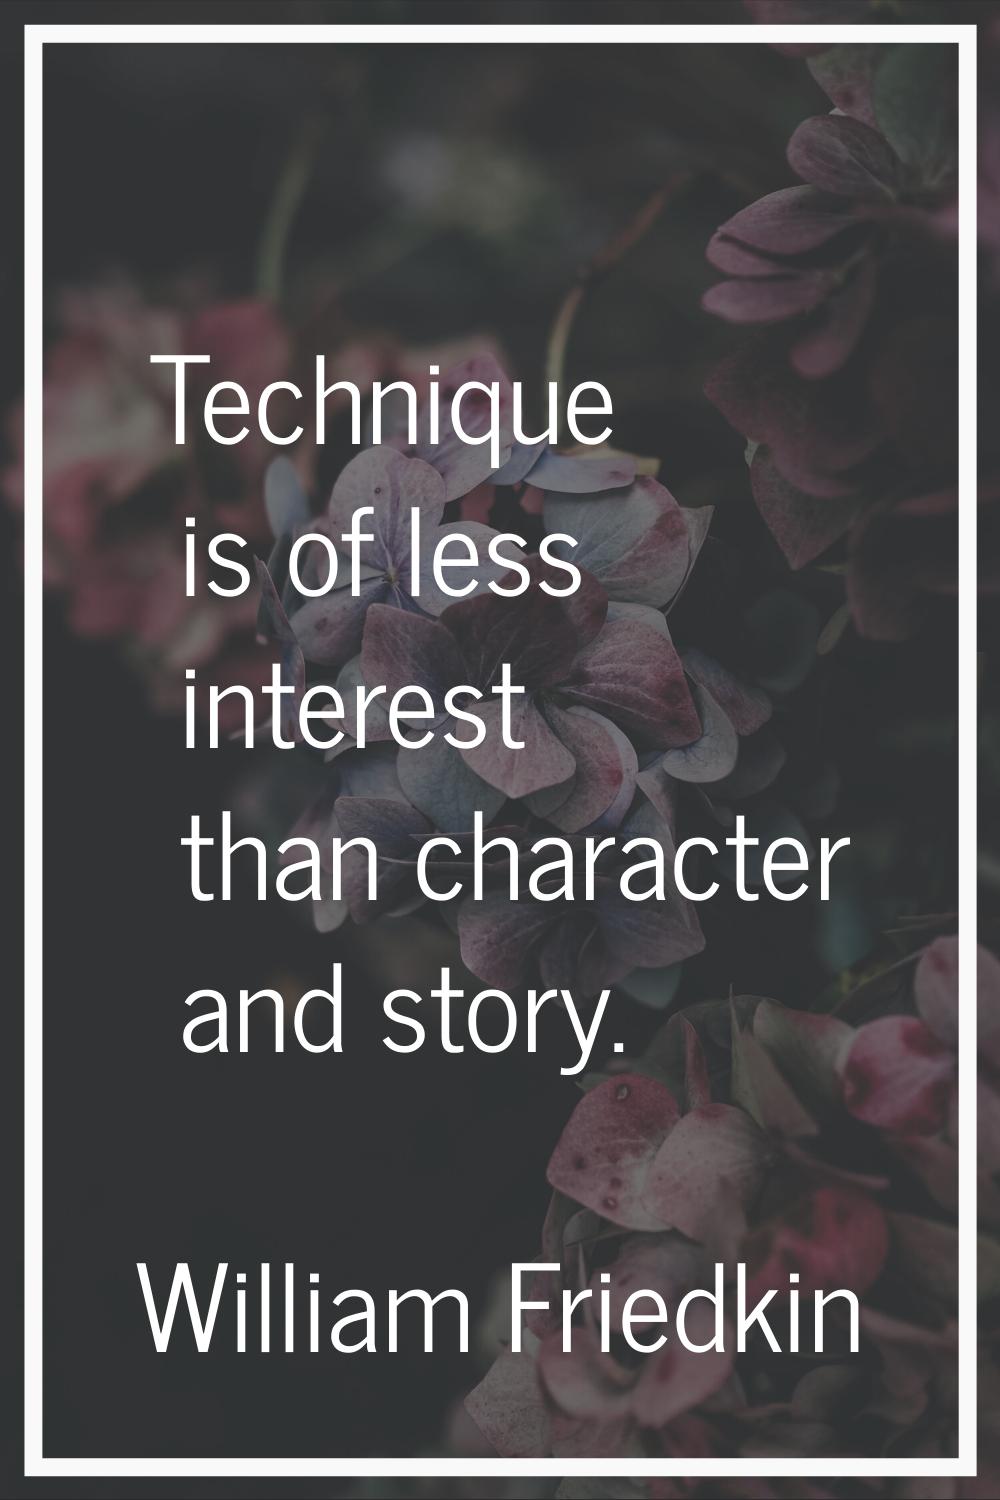 Technique is of less interest than character and story.